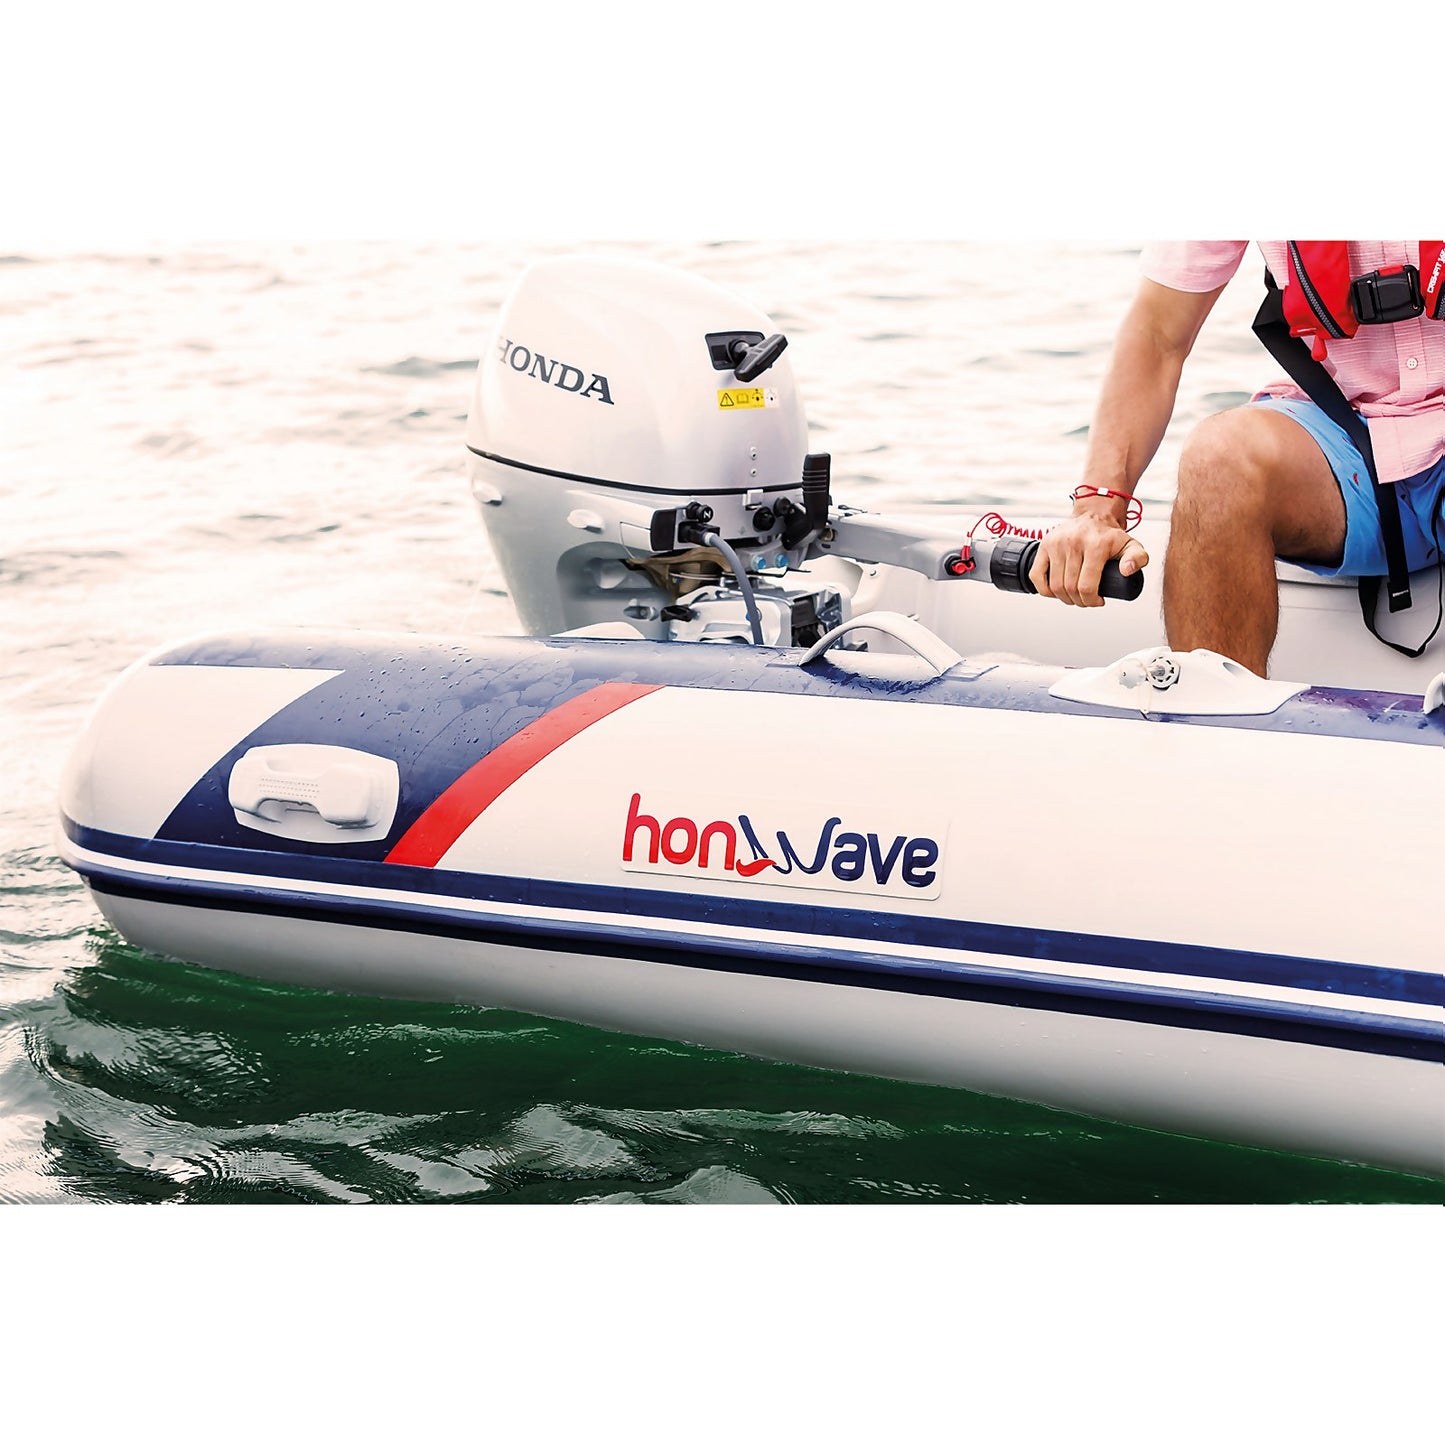 Honwave T38 3.8m Inflatable Dinghy Tender Boat with Inflatable V-Floor